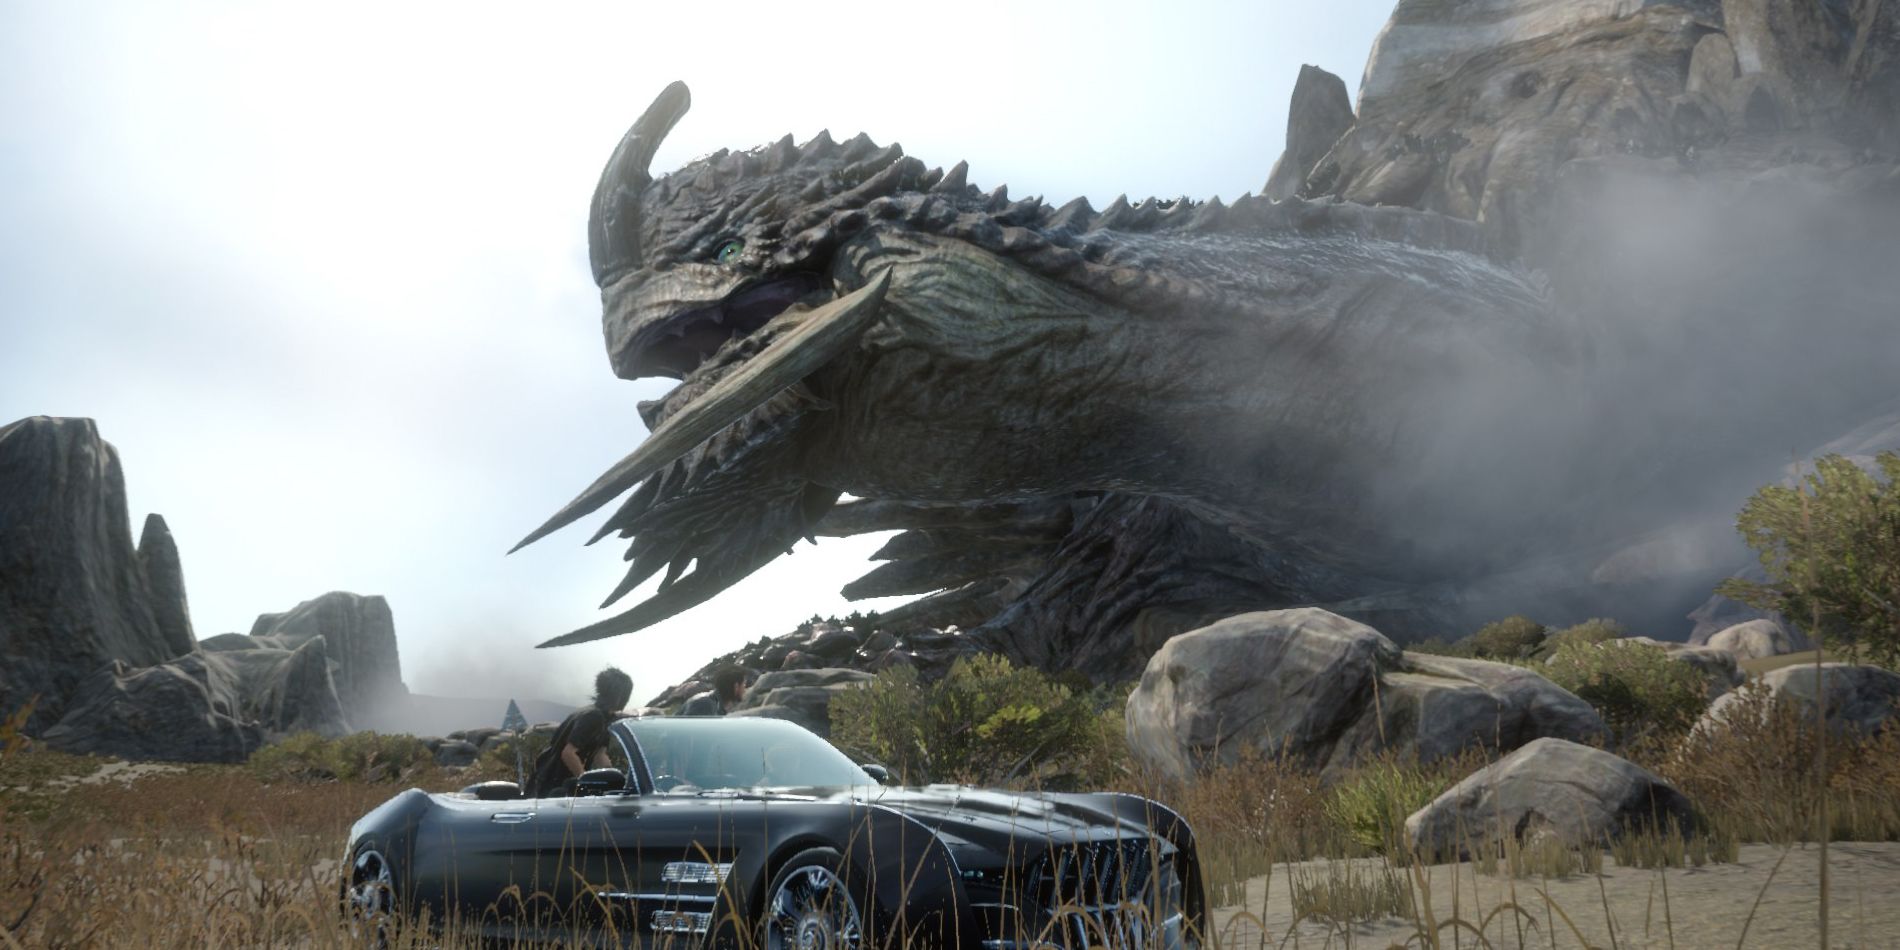 Noctis looking at Adamantoise, a massive tortoise, from their super rad car.